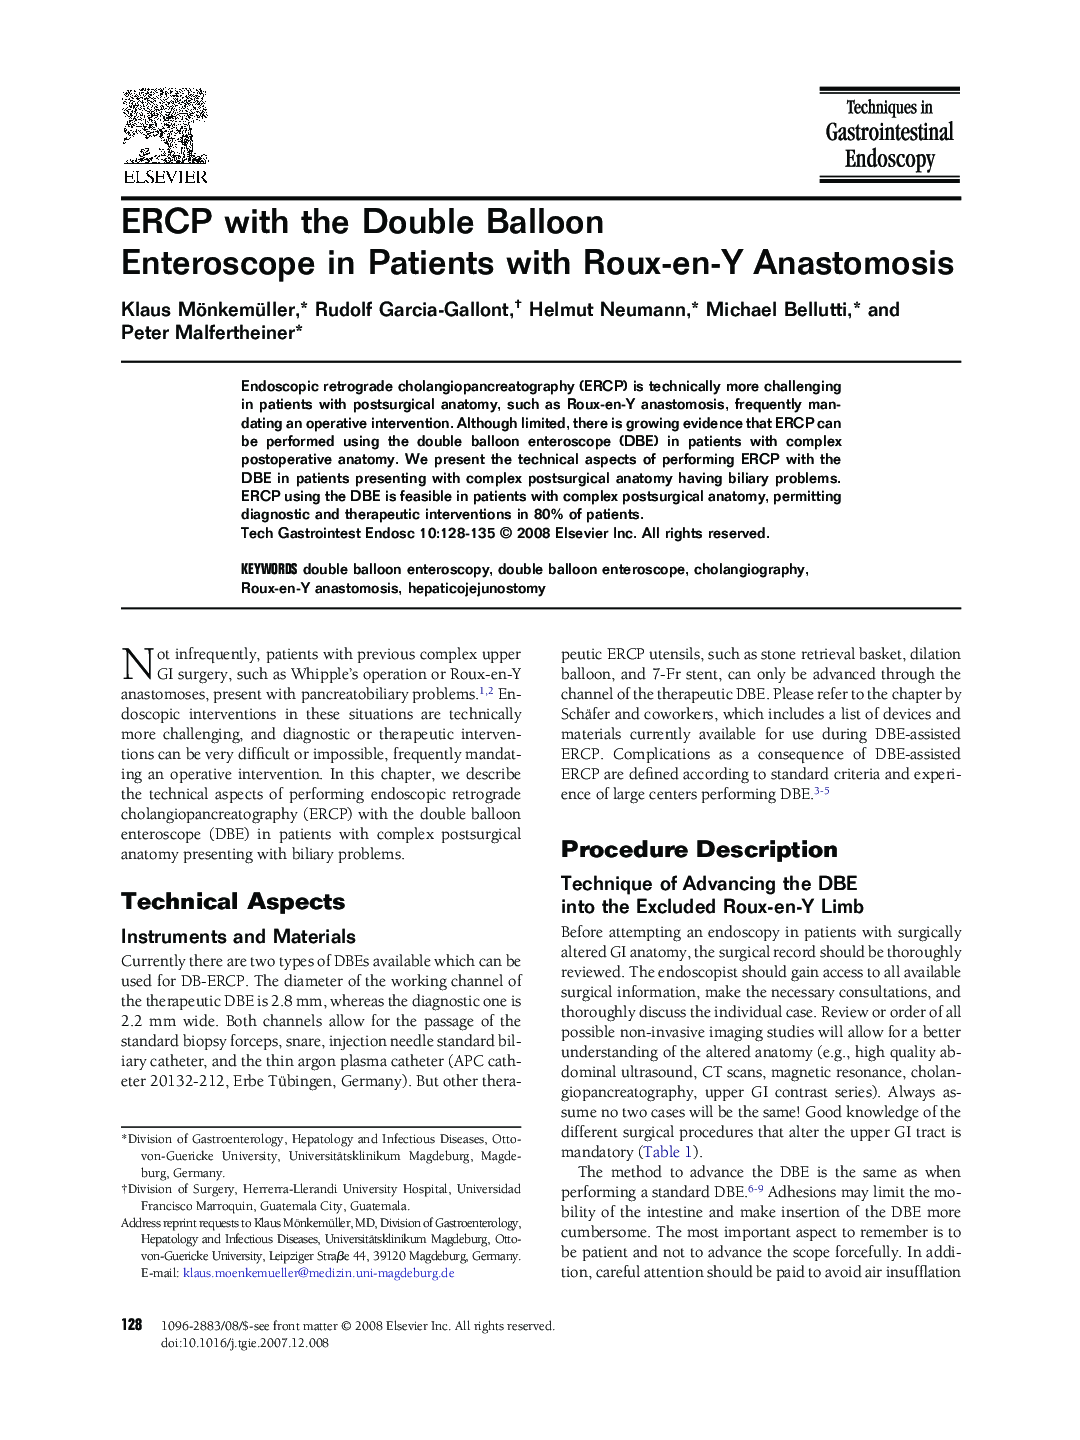 ERCP with the Double Balloon Enteroscope in Patients with Roux-en-Y Anastomosis